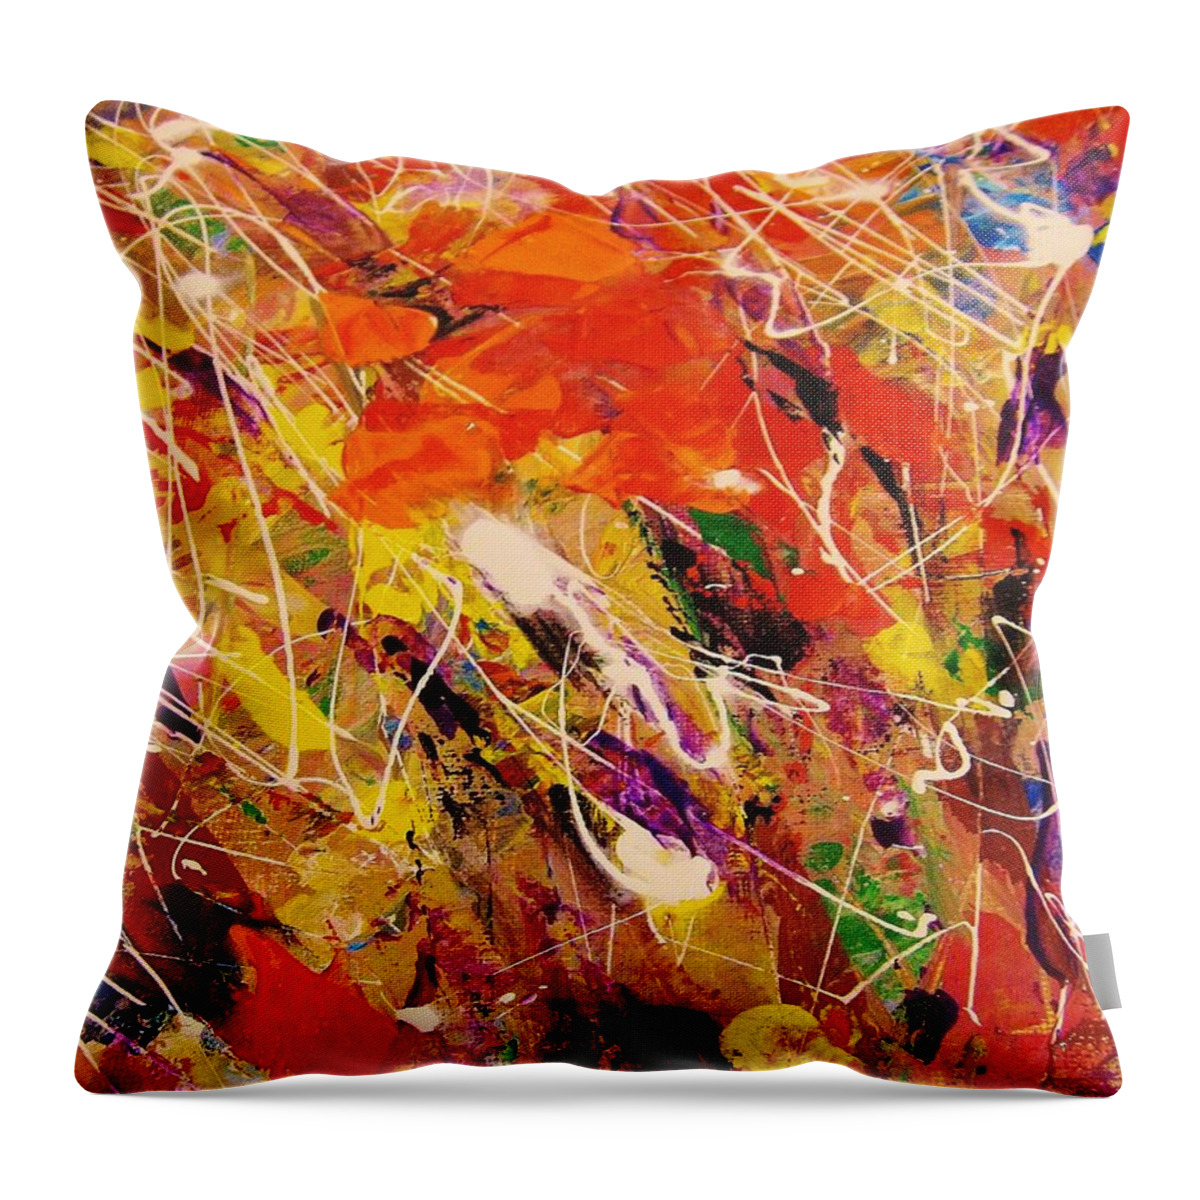 Healing Energy Spiritual Contemporary Art Throw Pillow featuring the painting Colors 15-3 by Helen Kagan